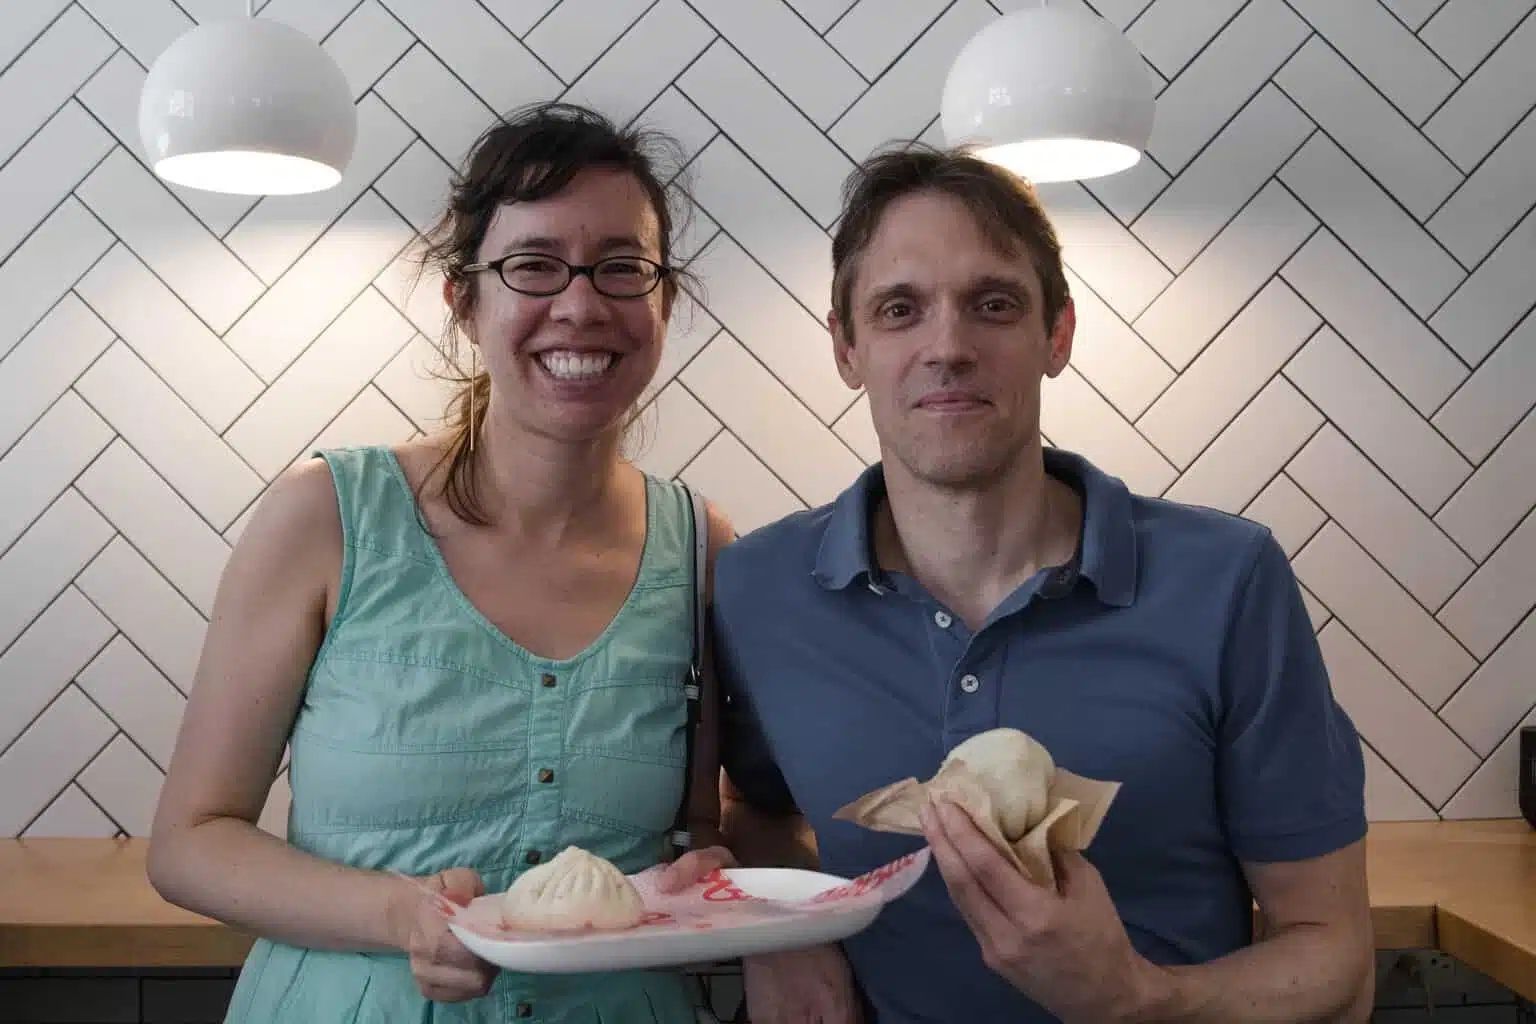 A couple smiles while standing in front of a tiled wall on an Off the Beaten Path Food Tour in Harvard Square.